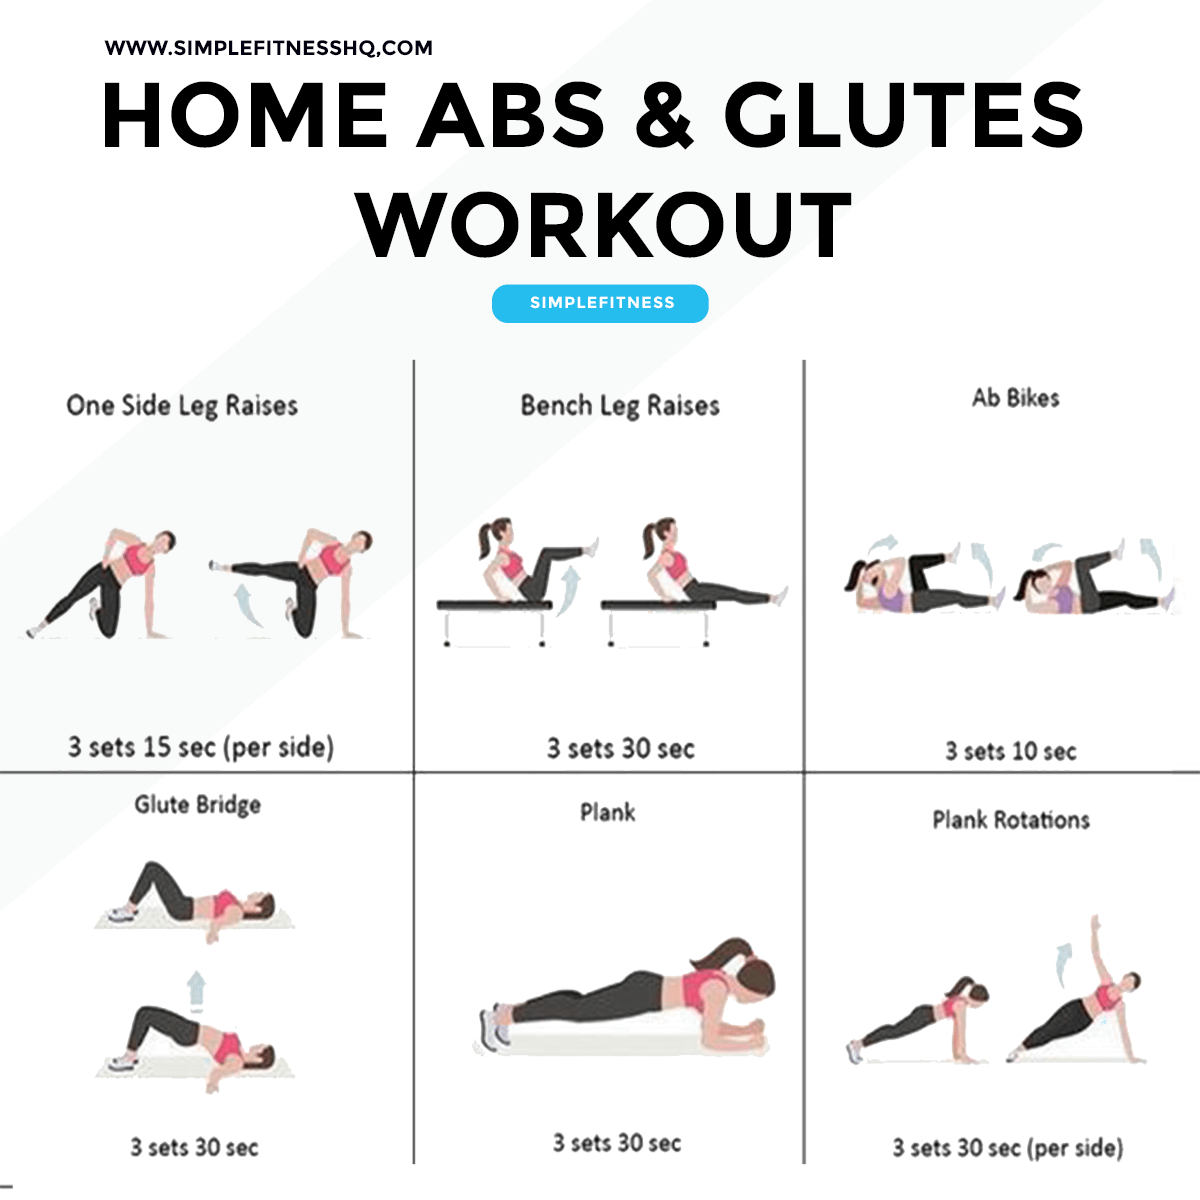 Home Abs & Booty Lower Body Workout For Women - SimpleFitness